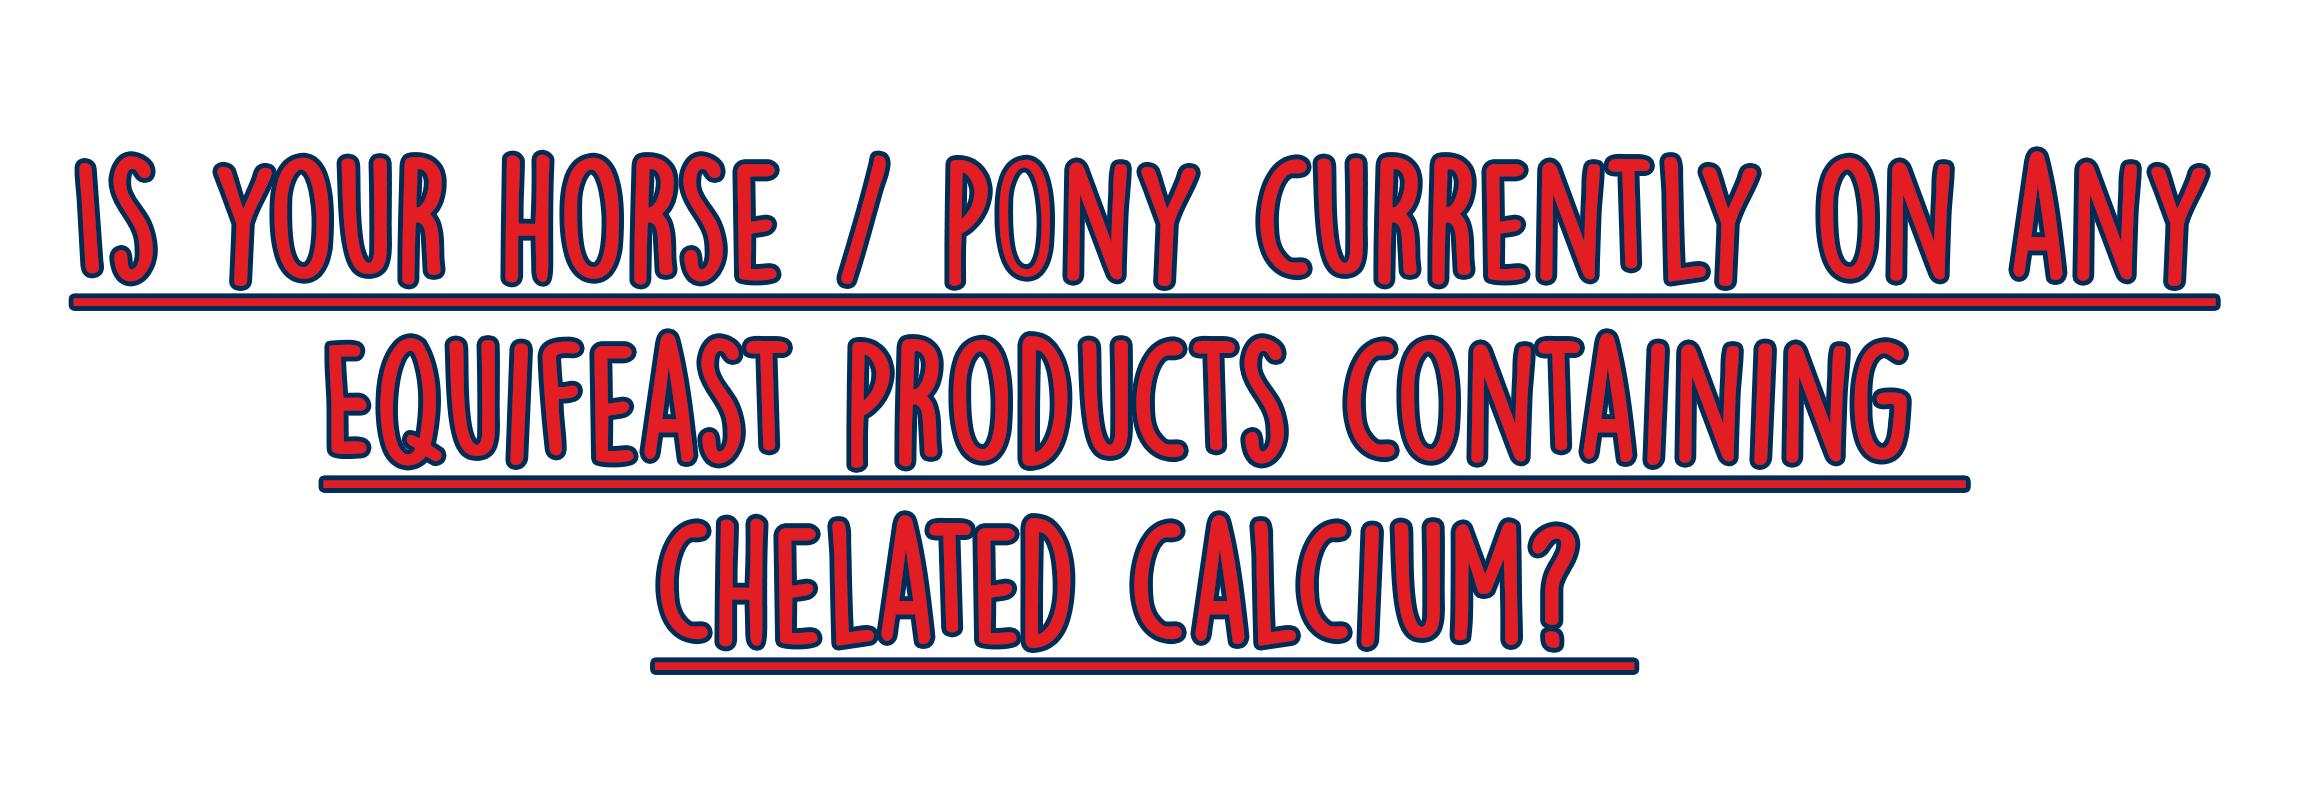 horse-on-any-products.png